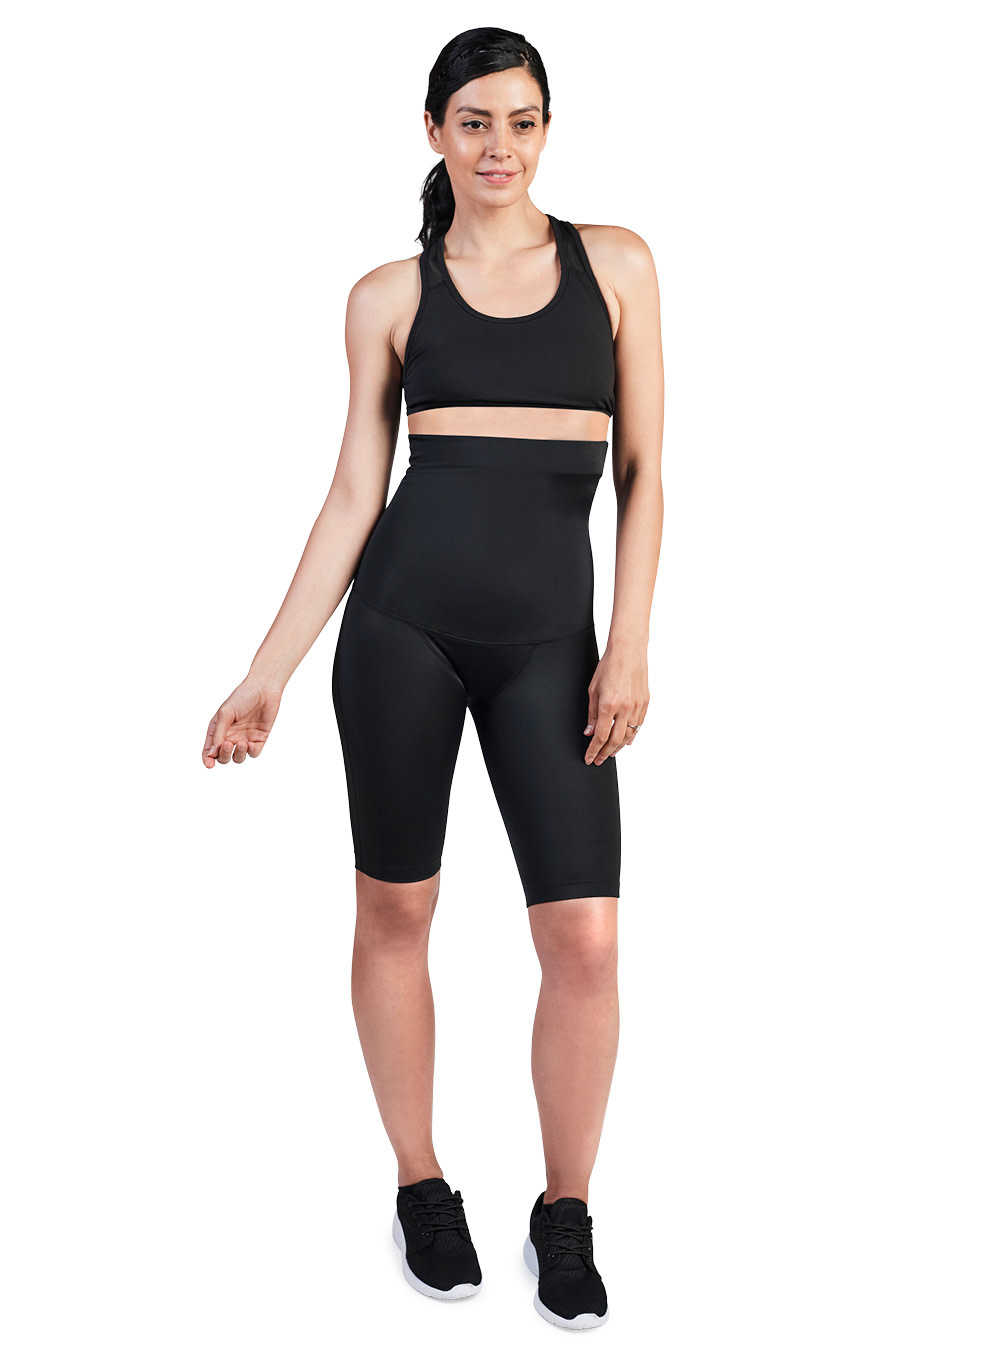 SRC Recovery Shorts helps get back your pre-baby body faster